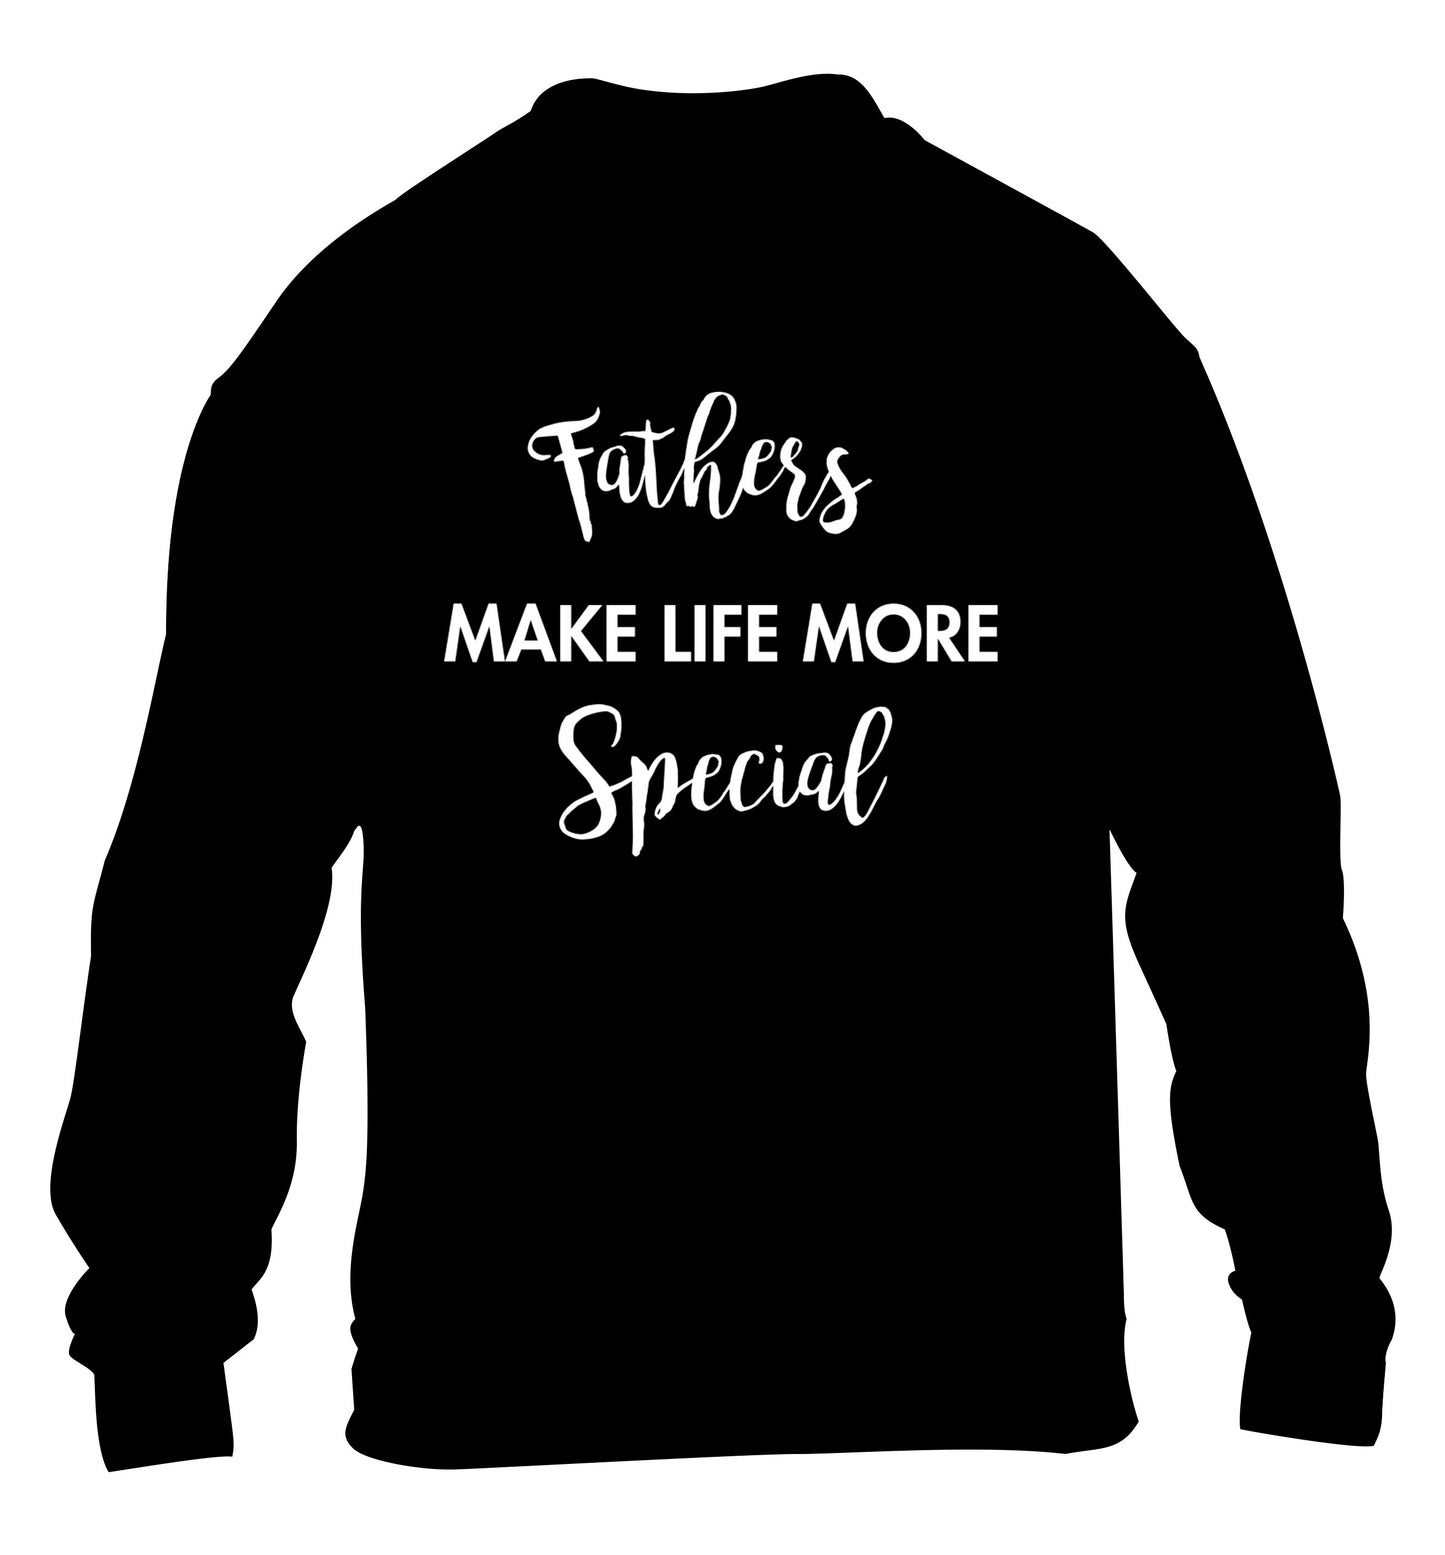 Fathers make life more special children's black sweater 12-14 Years